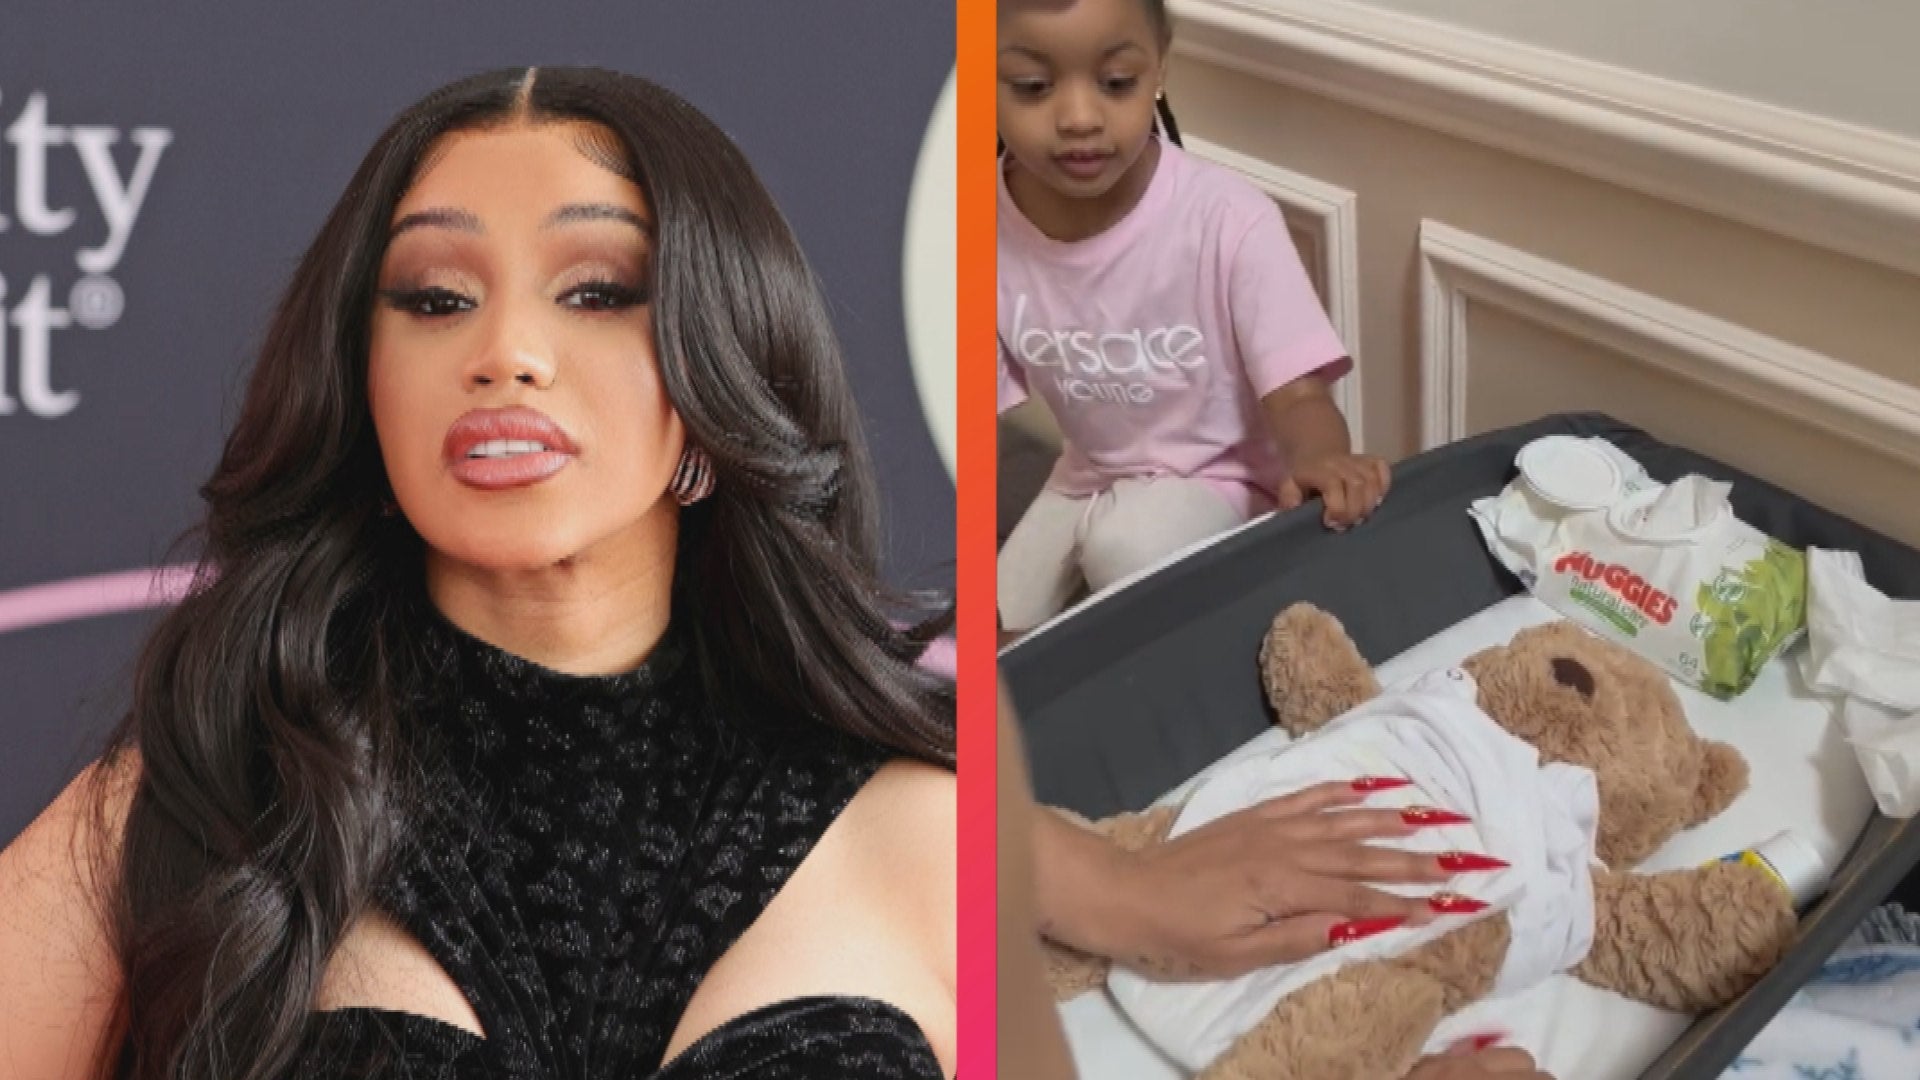 Cardi B and Offset's Kids Look So Grown Up in New Family Video